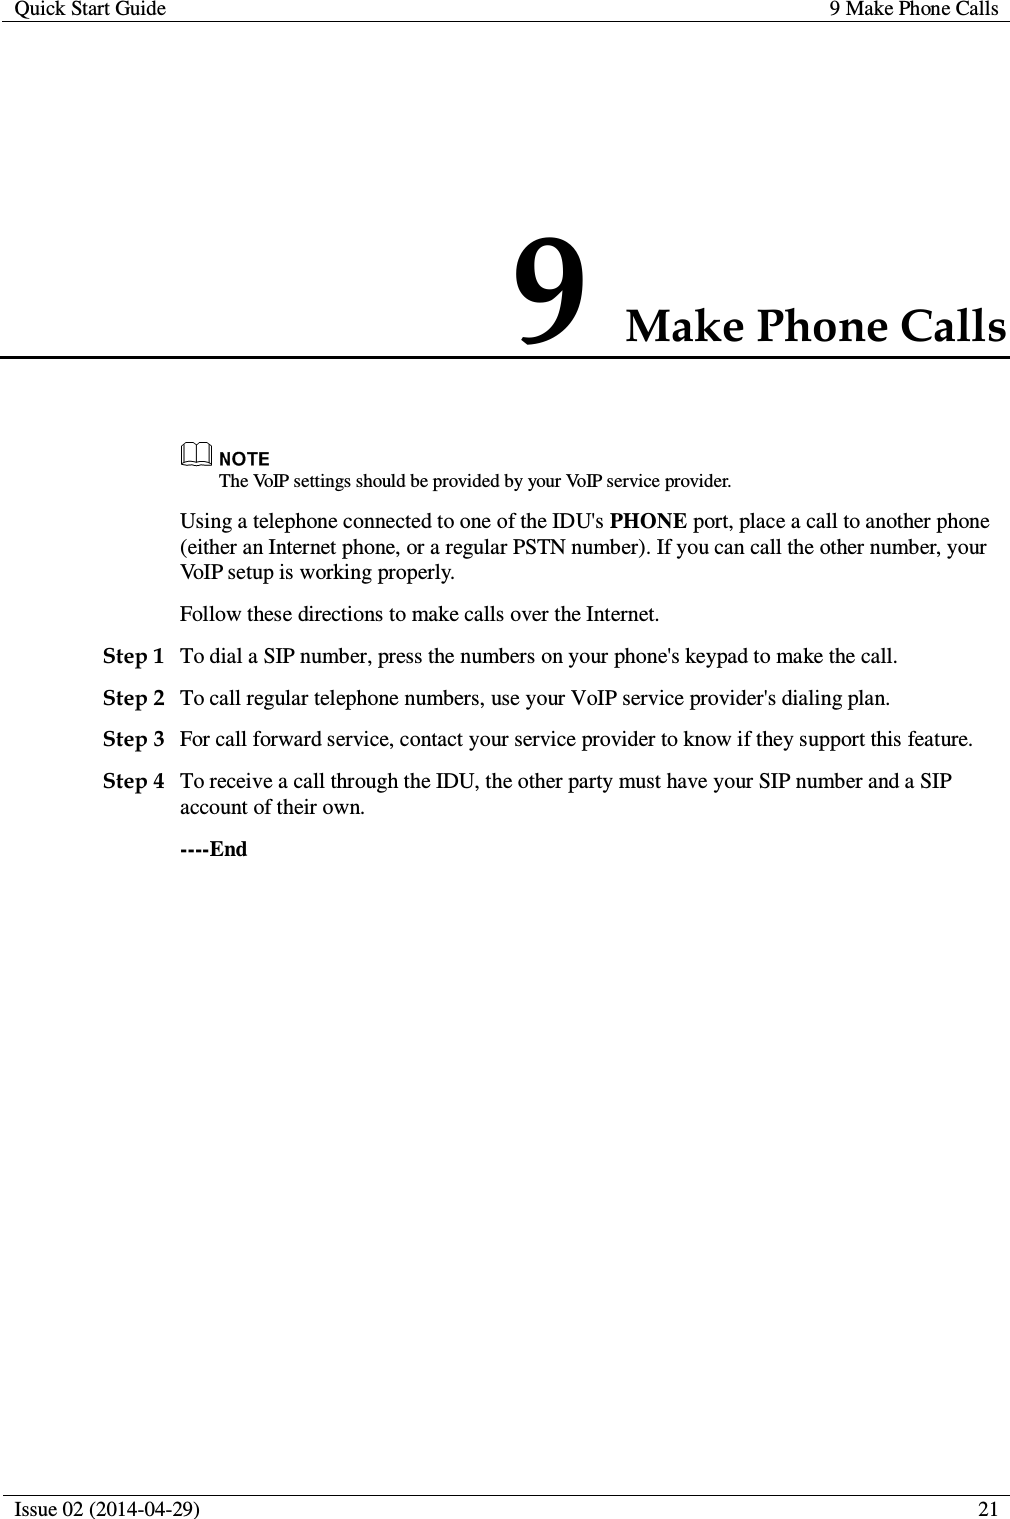 Quick Start Guide 9 Make Phone Calls  Issue 02 (2014-04-29)  21  9 Make Phone Calls  The VoIP settings should be provided by your VoIP service provider. Using a telephone connected to one of the IDU&apos;s PHONE port, place a call to another phone (either an Internet phone, or a regular PSTN number). If you can call the other number, your VoIP setup is working properly. Follow these directions to make calls over the Internet. Step 1 To dial a SIP number, press the numbers on your phone&apos;s keypad to make the call. Step 2 To call regular telephone numbers, use your VoIP service provider&apos;s dialing plan. Step 3 For call forward service, contact your service provider to know if they support this feature. Step 4 To receive a call through the IDU, the other party must have your SIP number and a SIP account of their own. ----End 